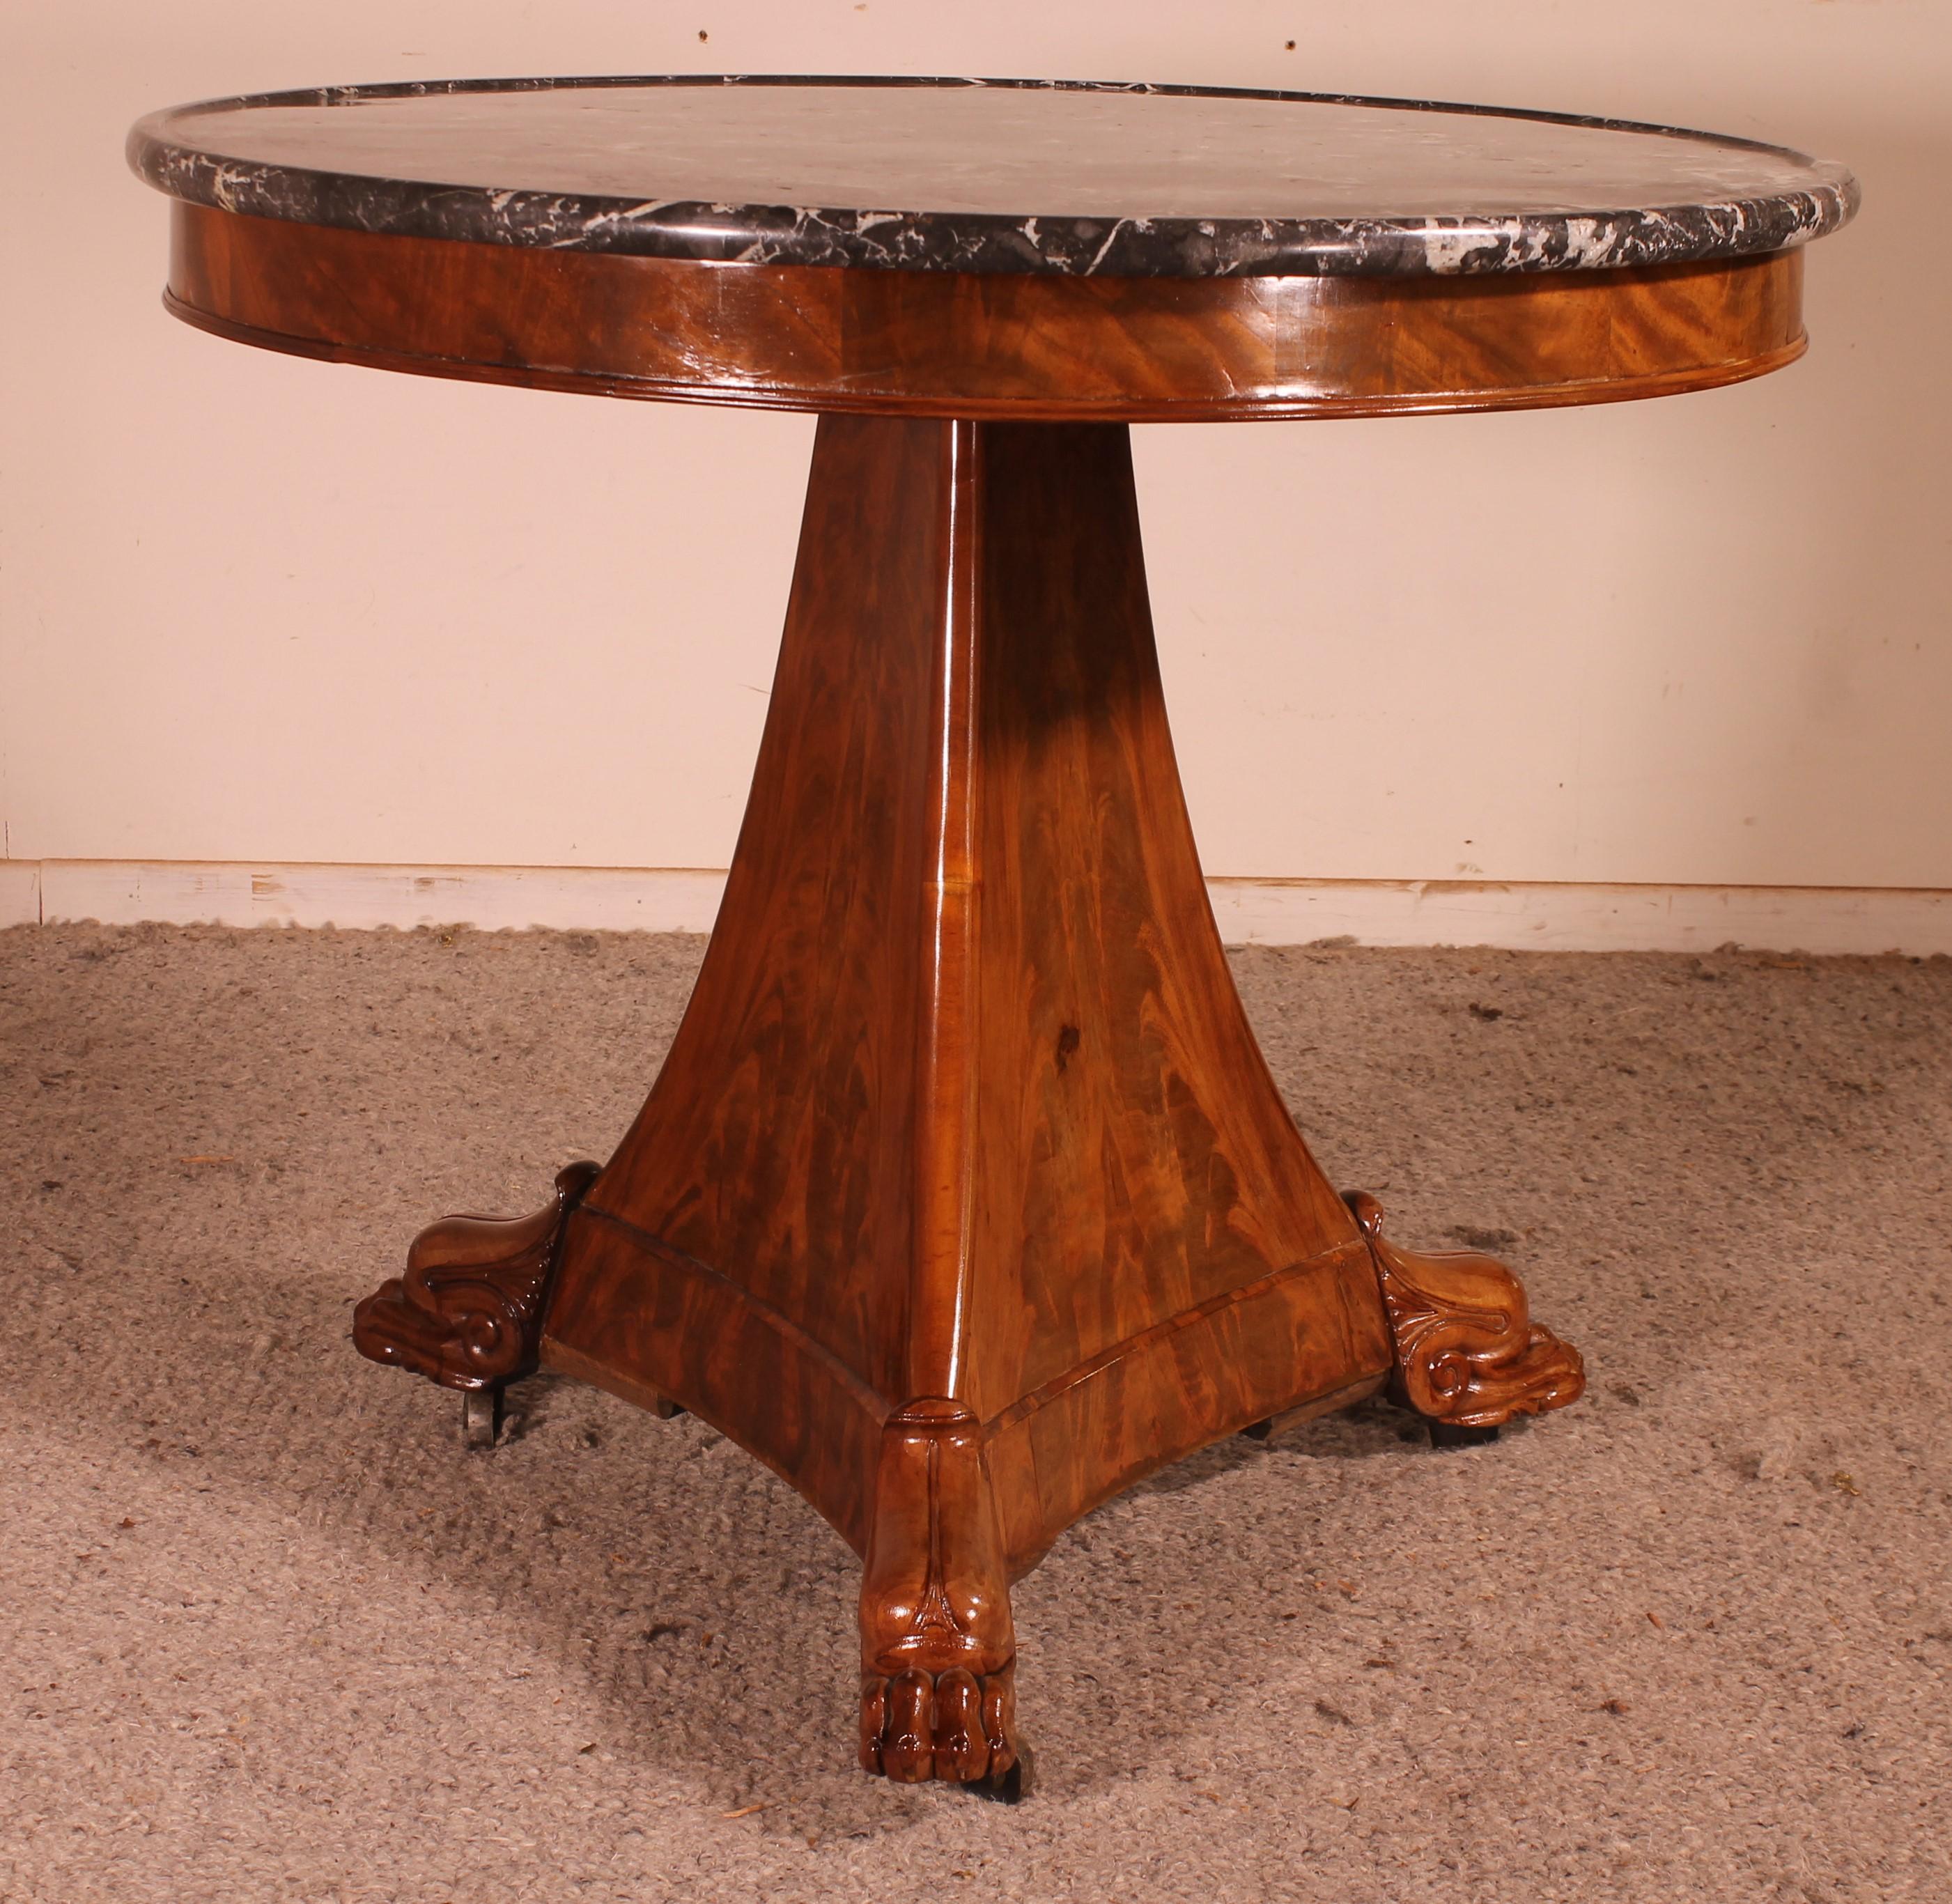 19th Century Empire Pedestal Table with Its Saint-Anne Marble For Sale